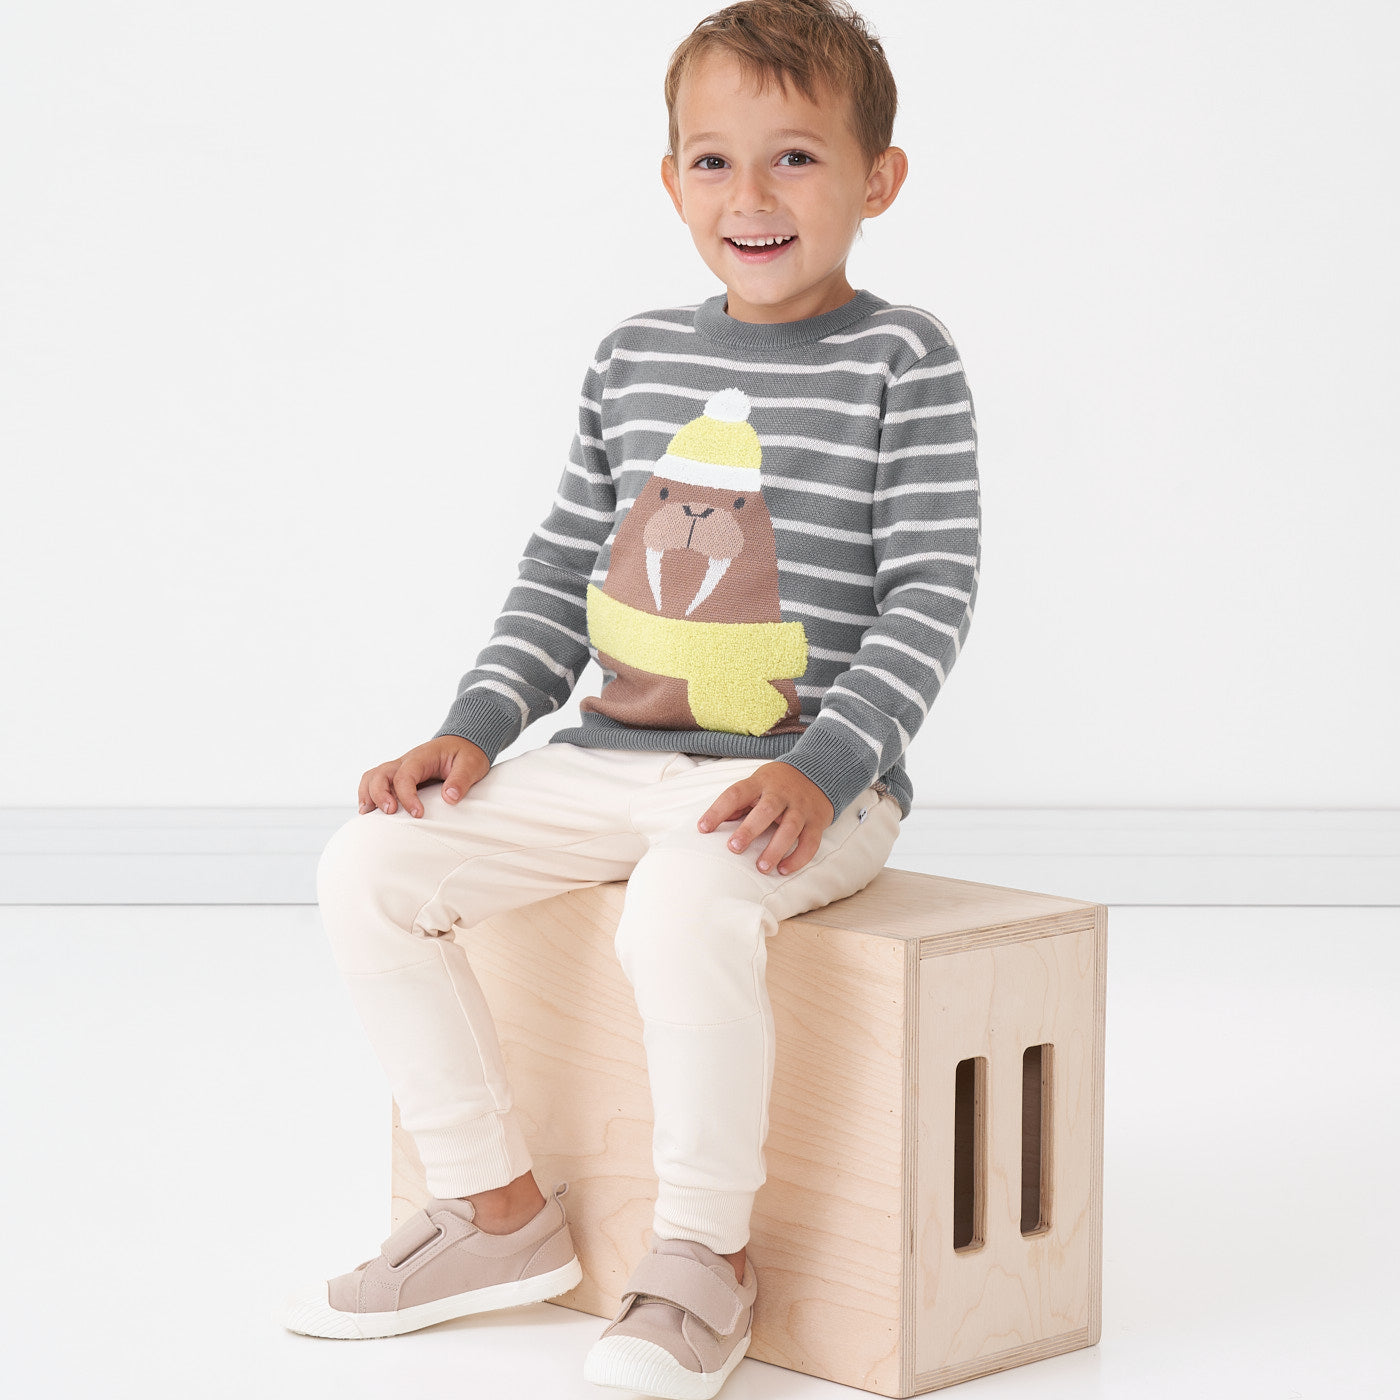 Child sitting on a box wearing a Walrus knit sweater and coordinating Cream joggers